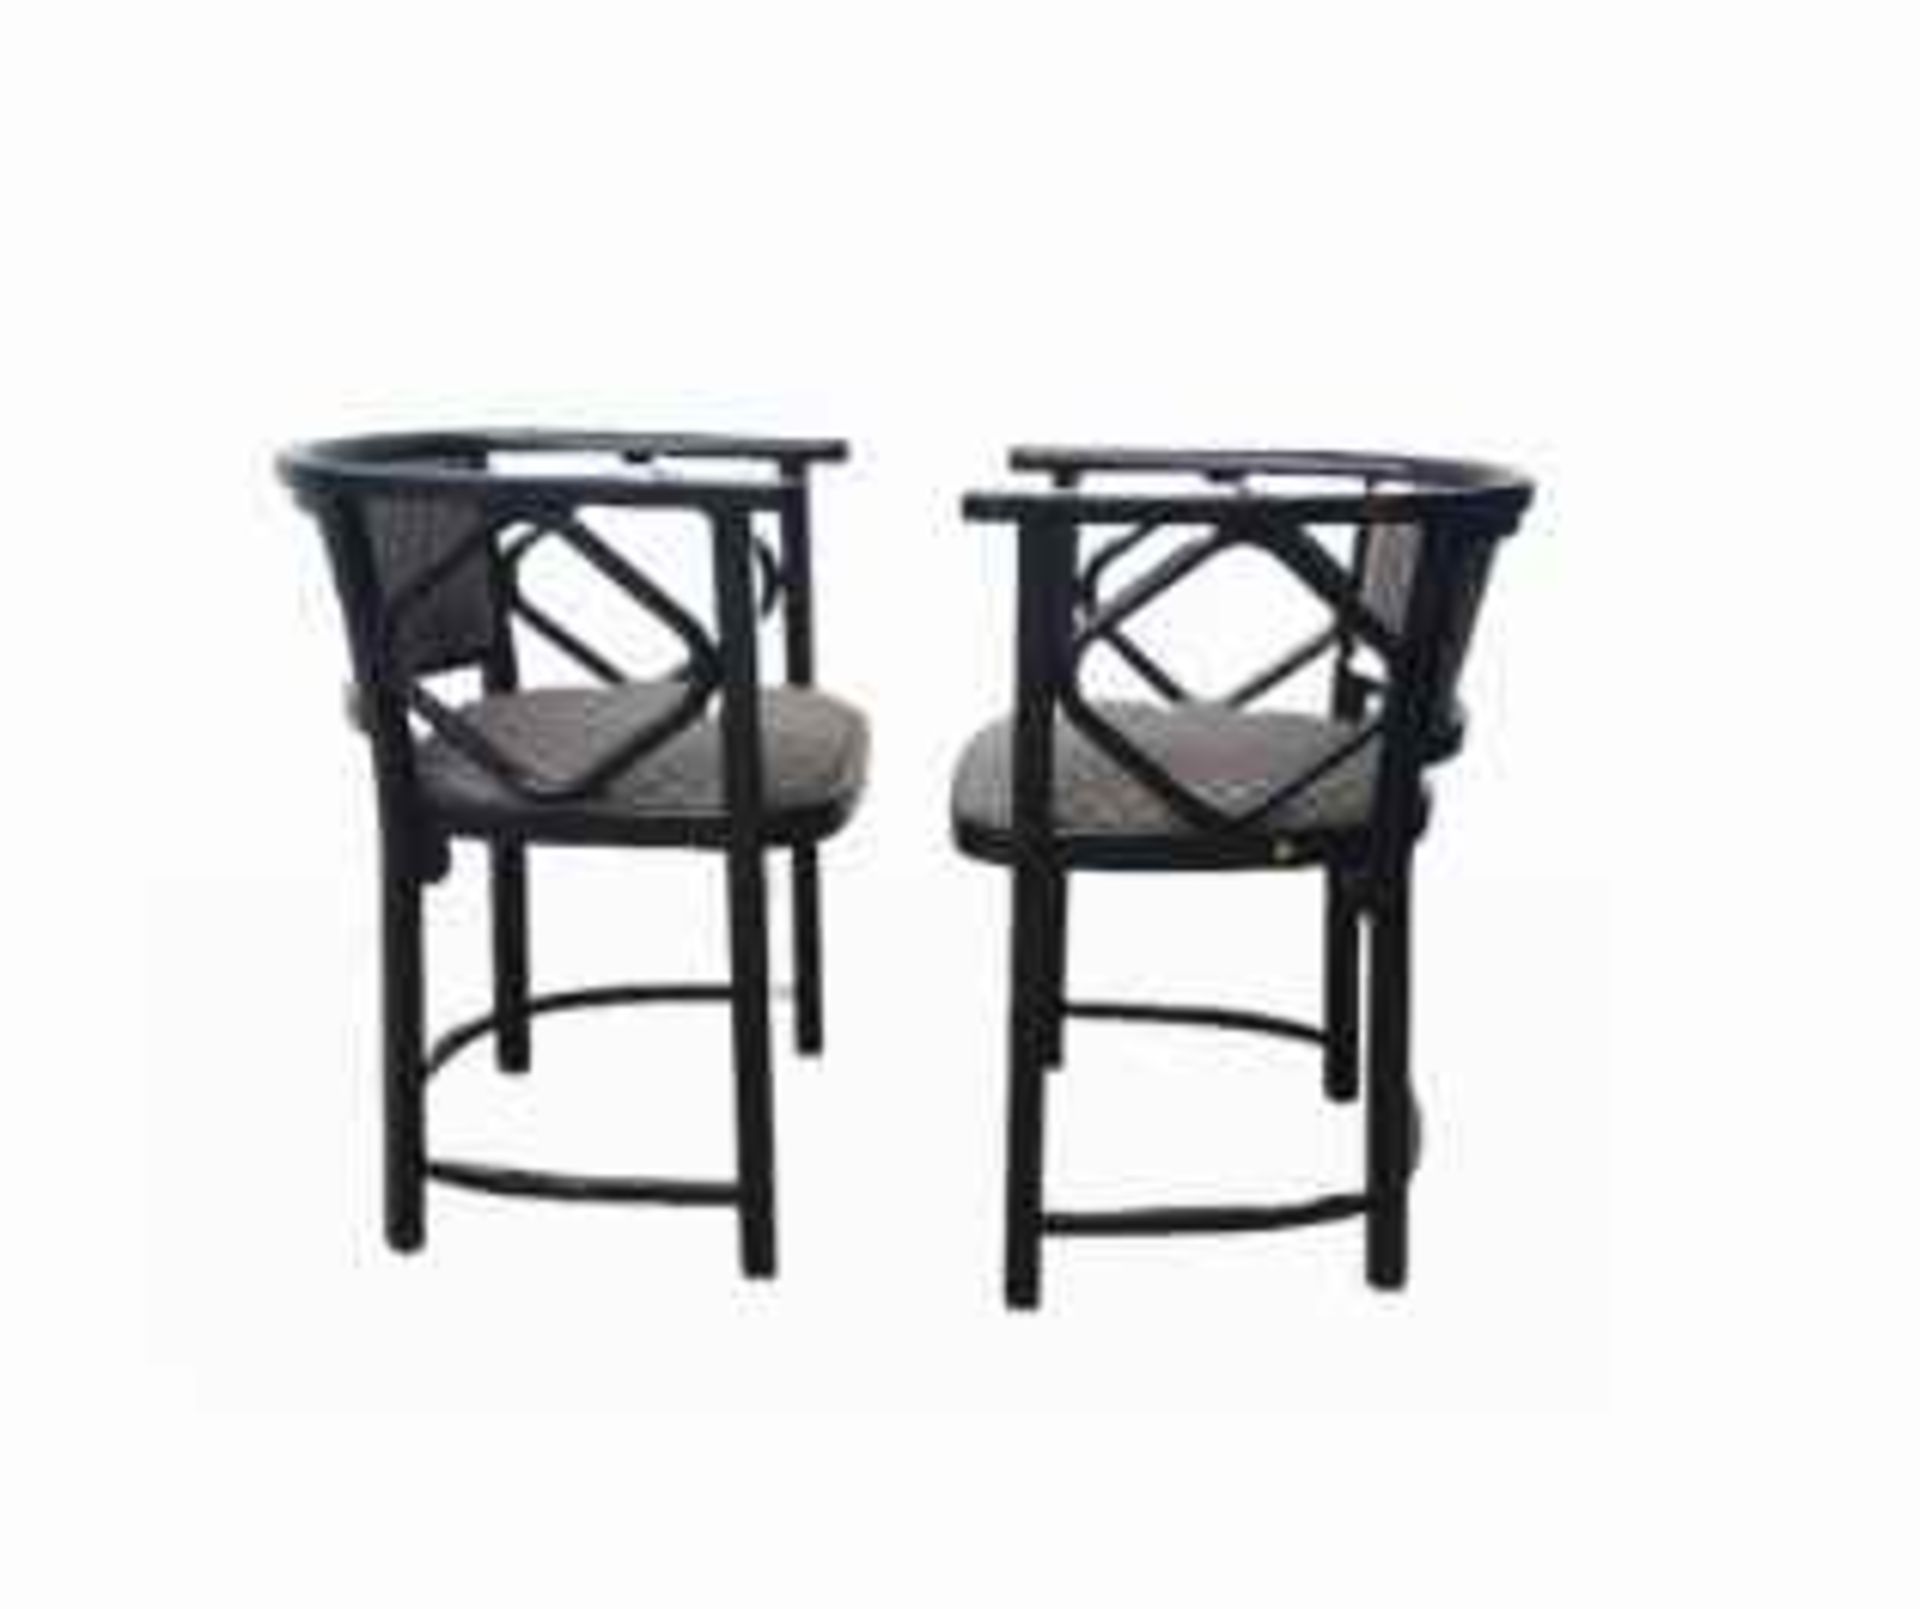 Thonet | Varient "Fledermaus" | 3 Piece Set: 2 Chairs & 1 Table - Image 2 of 8